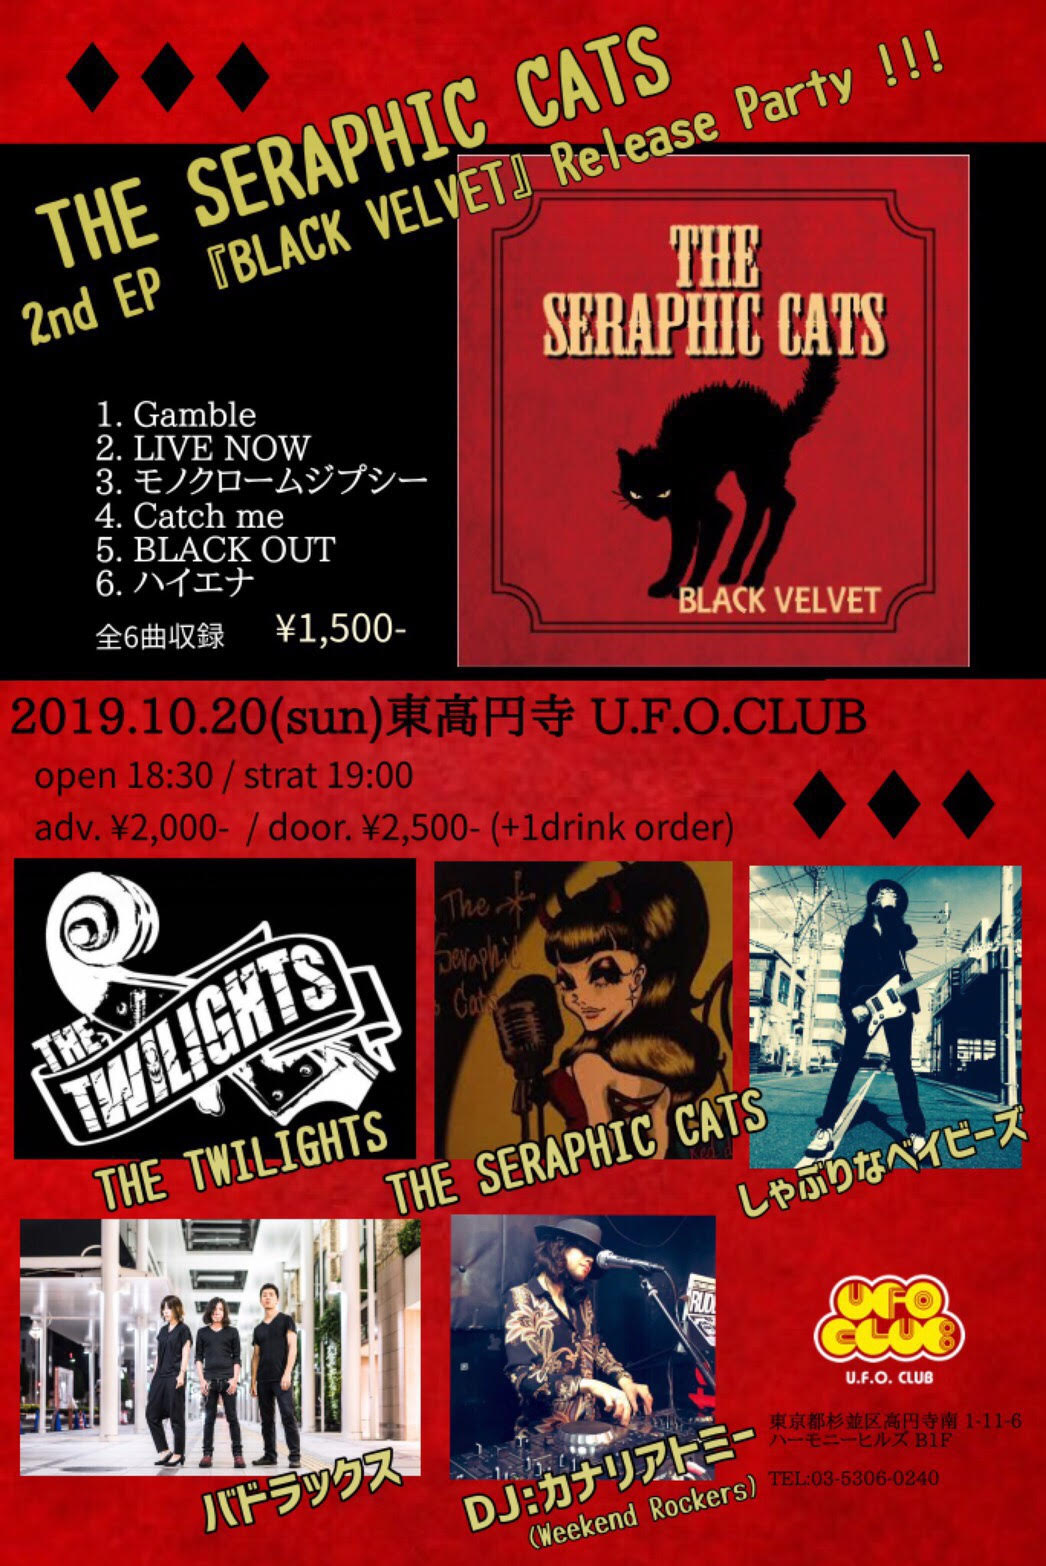 The Seraphic Cats 2nd EP